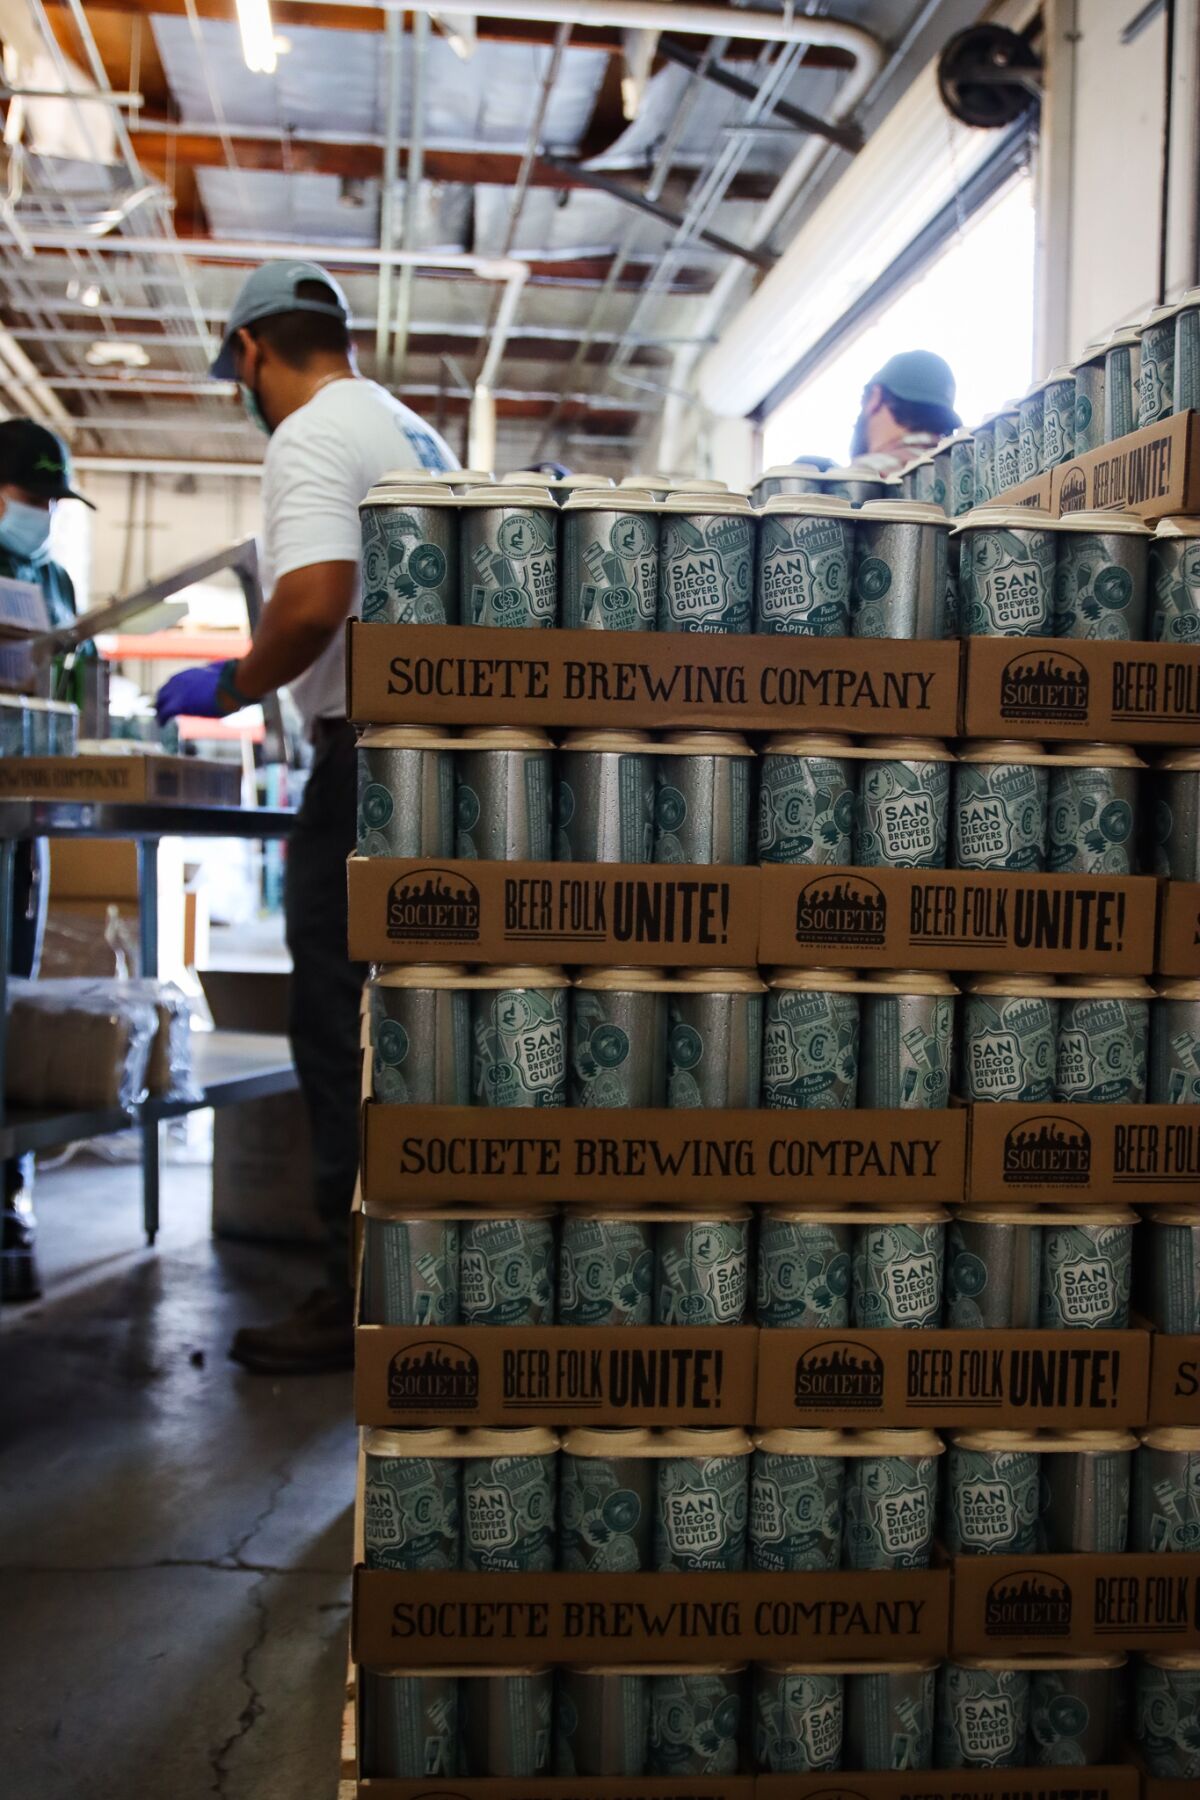 A look at the canning process for 2021 Capital of Craft IPA, which took place at Societe Brewing Company.